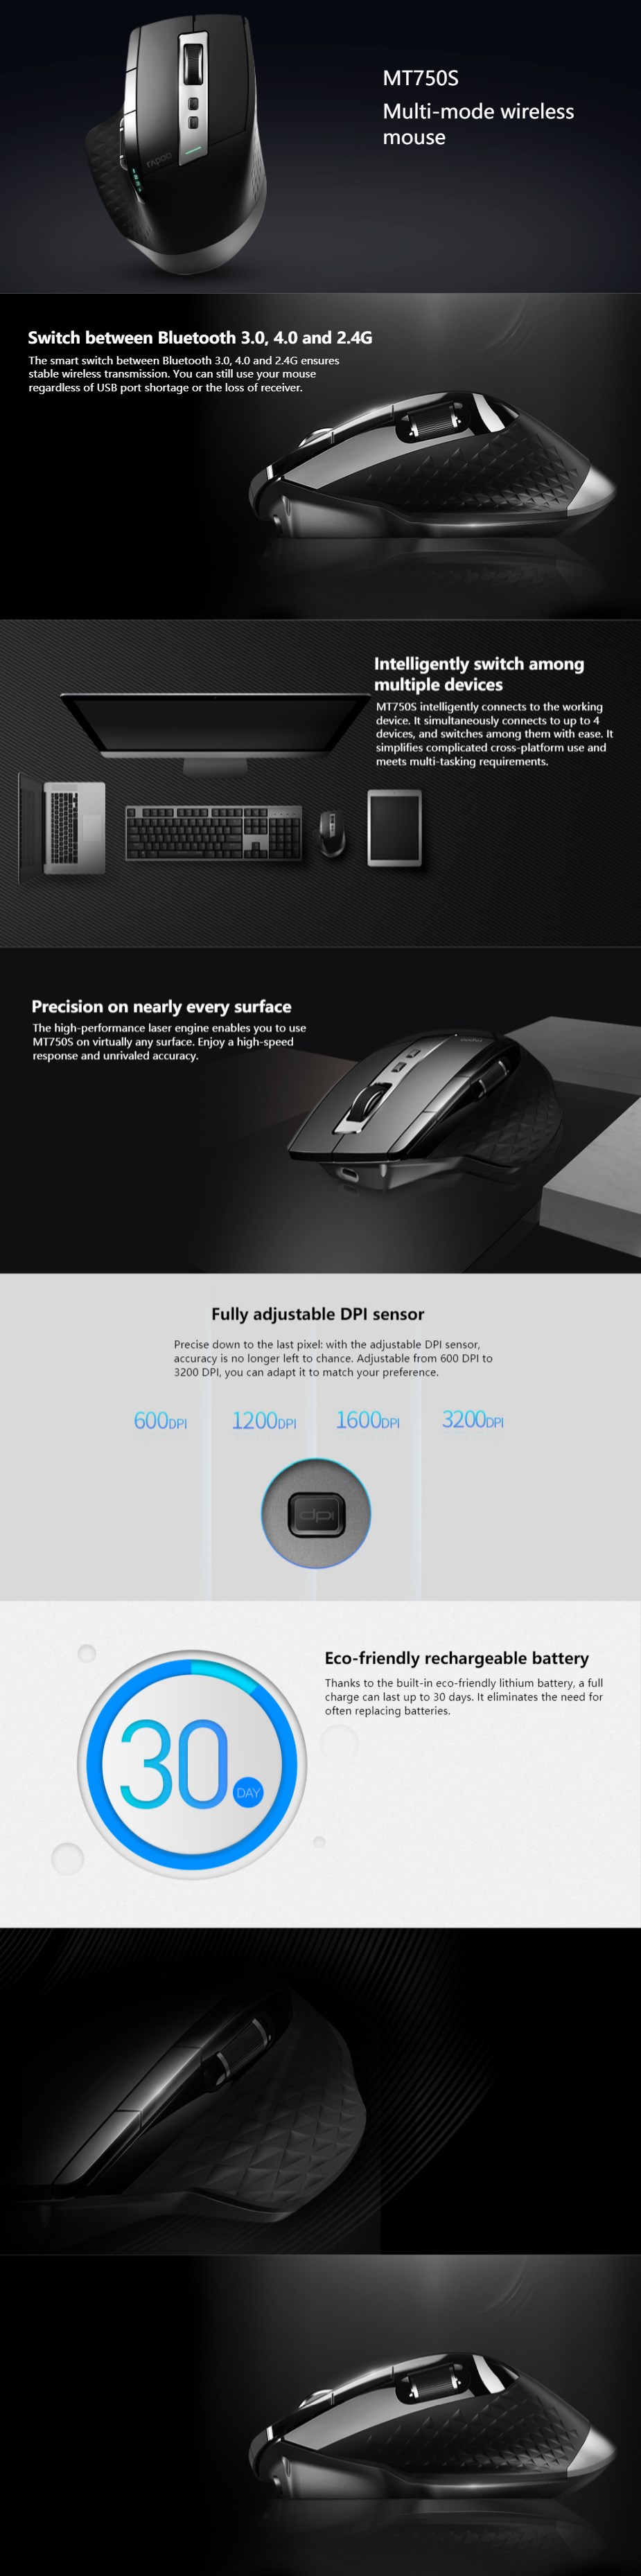 Rapoo MT750S Wireless Bluetooth Laser Mouse - Overview 1